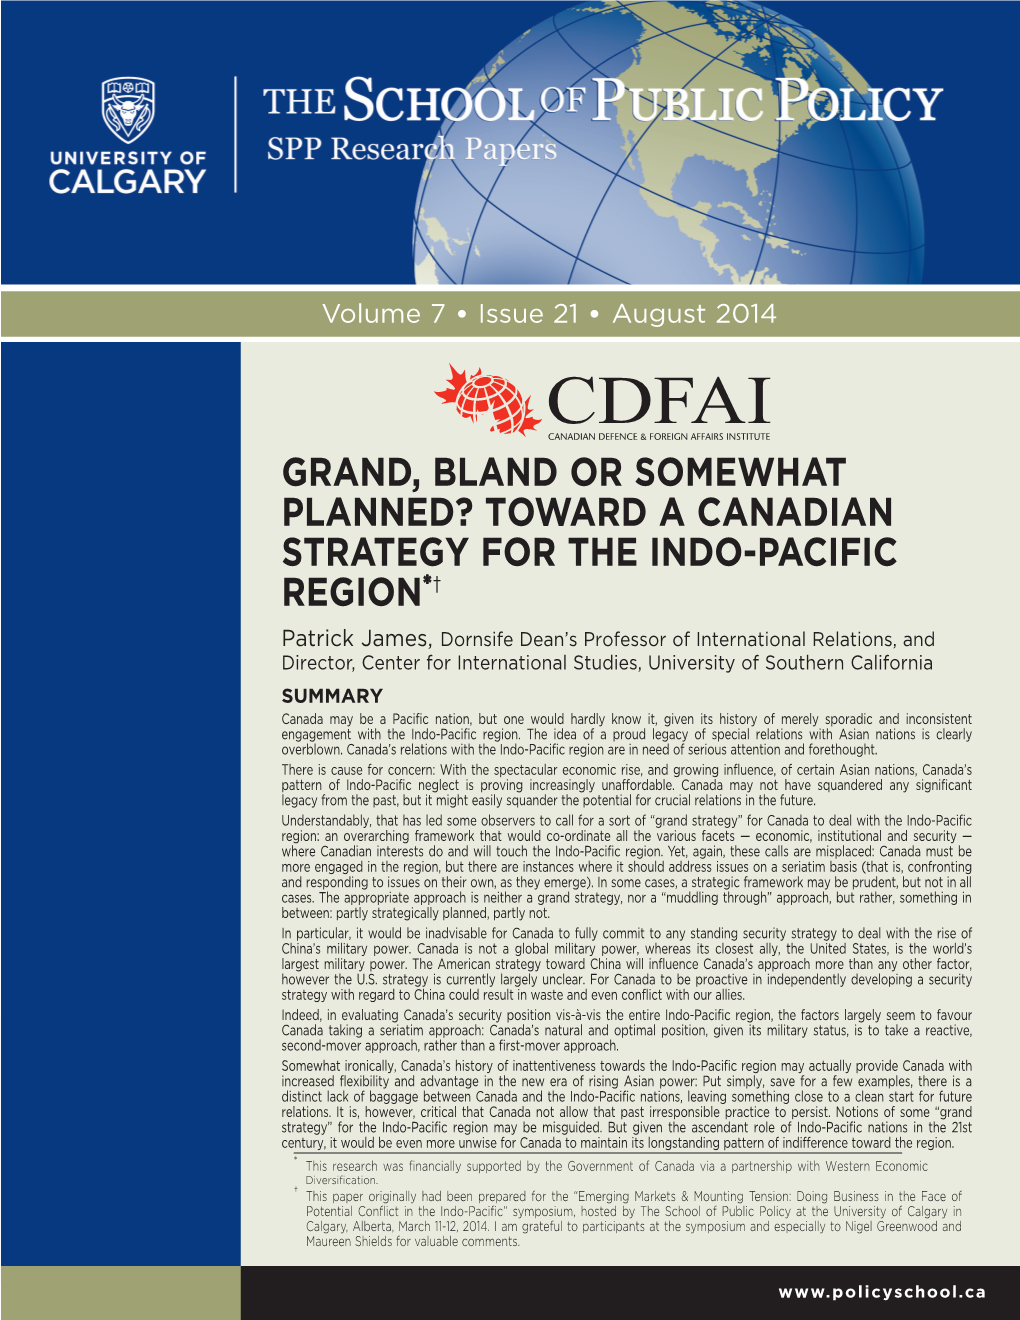 Grand, Bland Or Somewhat Planned? Toward a Canadian Strategy for the Indo-Pacific Region